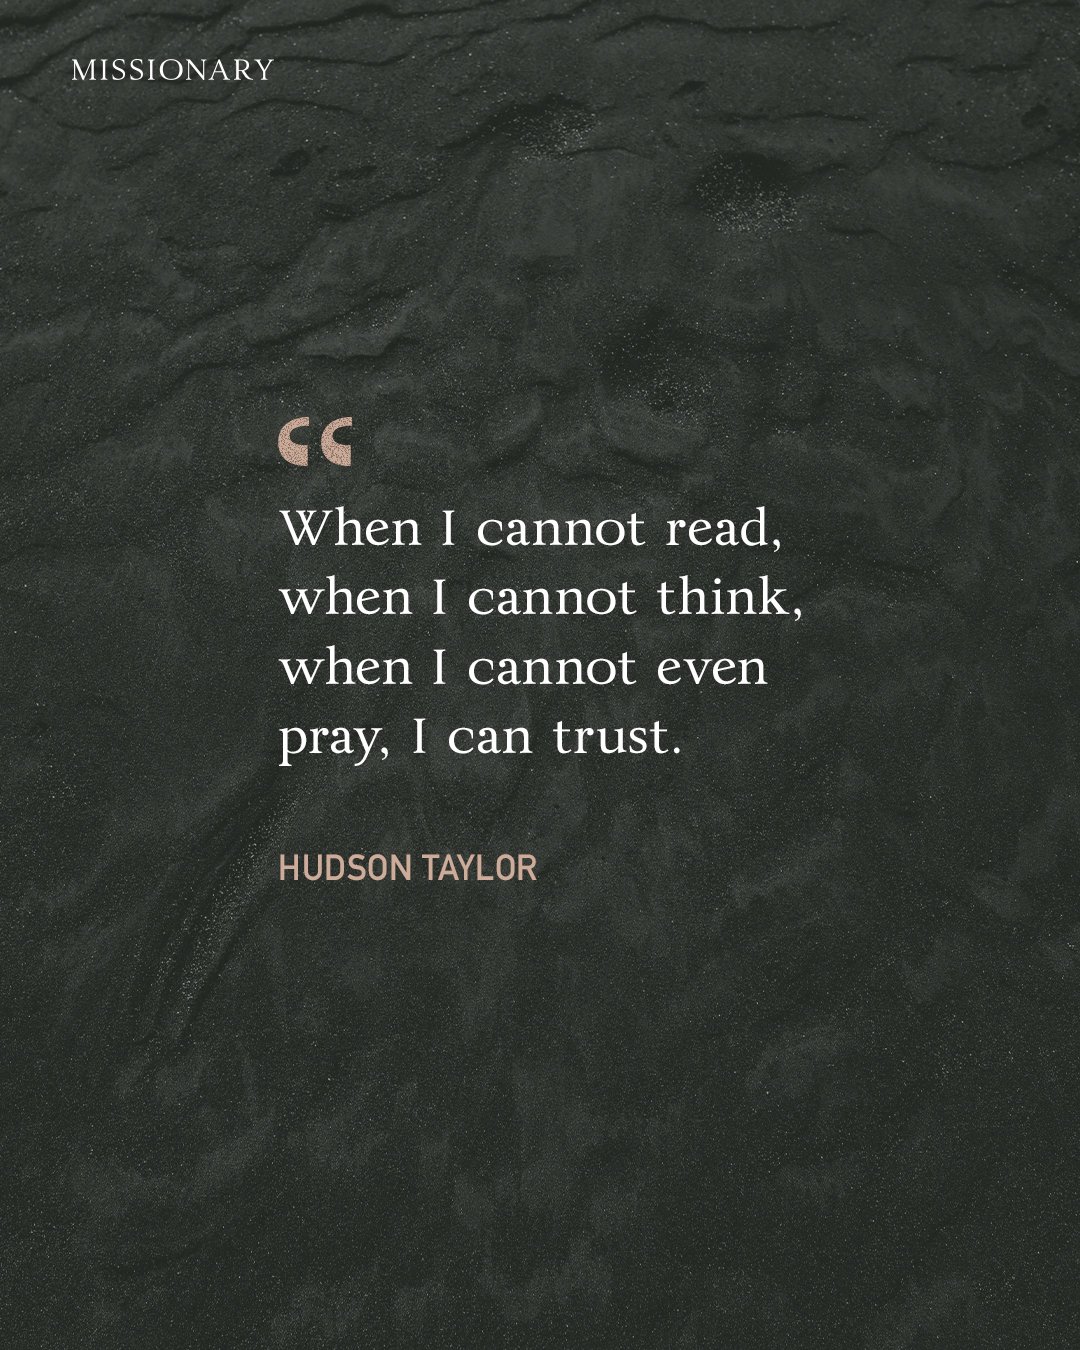 &ldquo;When I cannot read, when I cannot think, when I cannot even pray, I can trust.&rdquo; ー Hudson Taylor